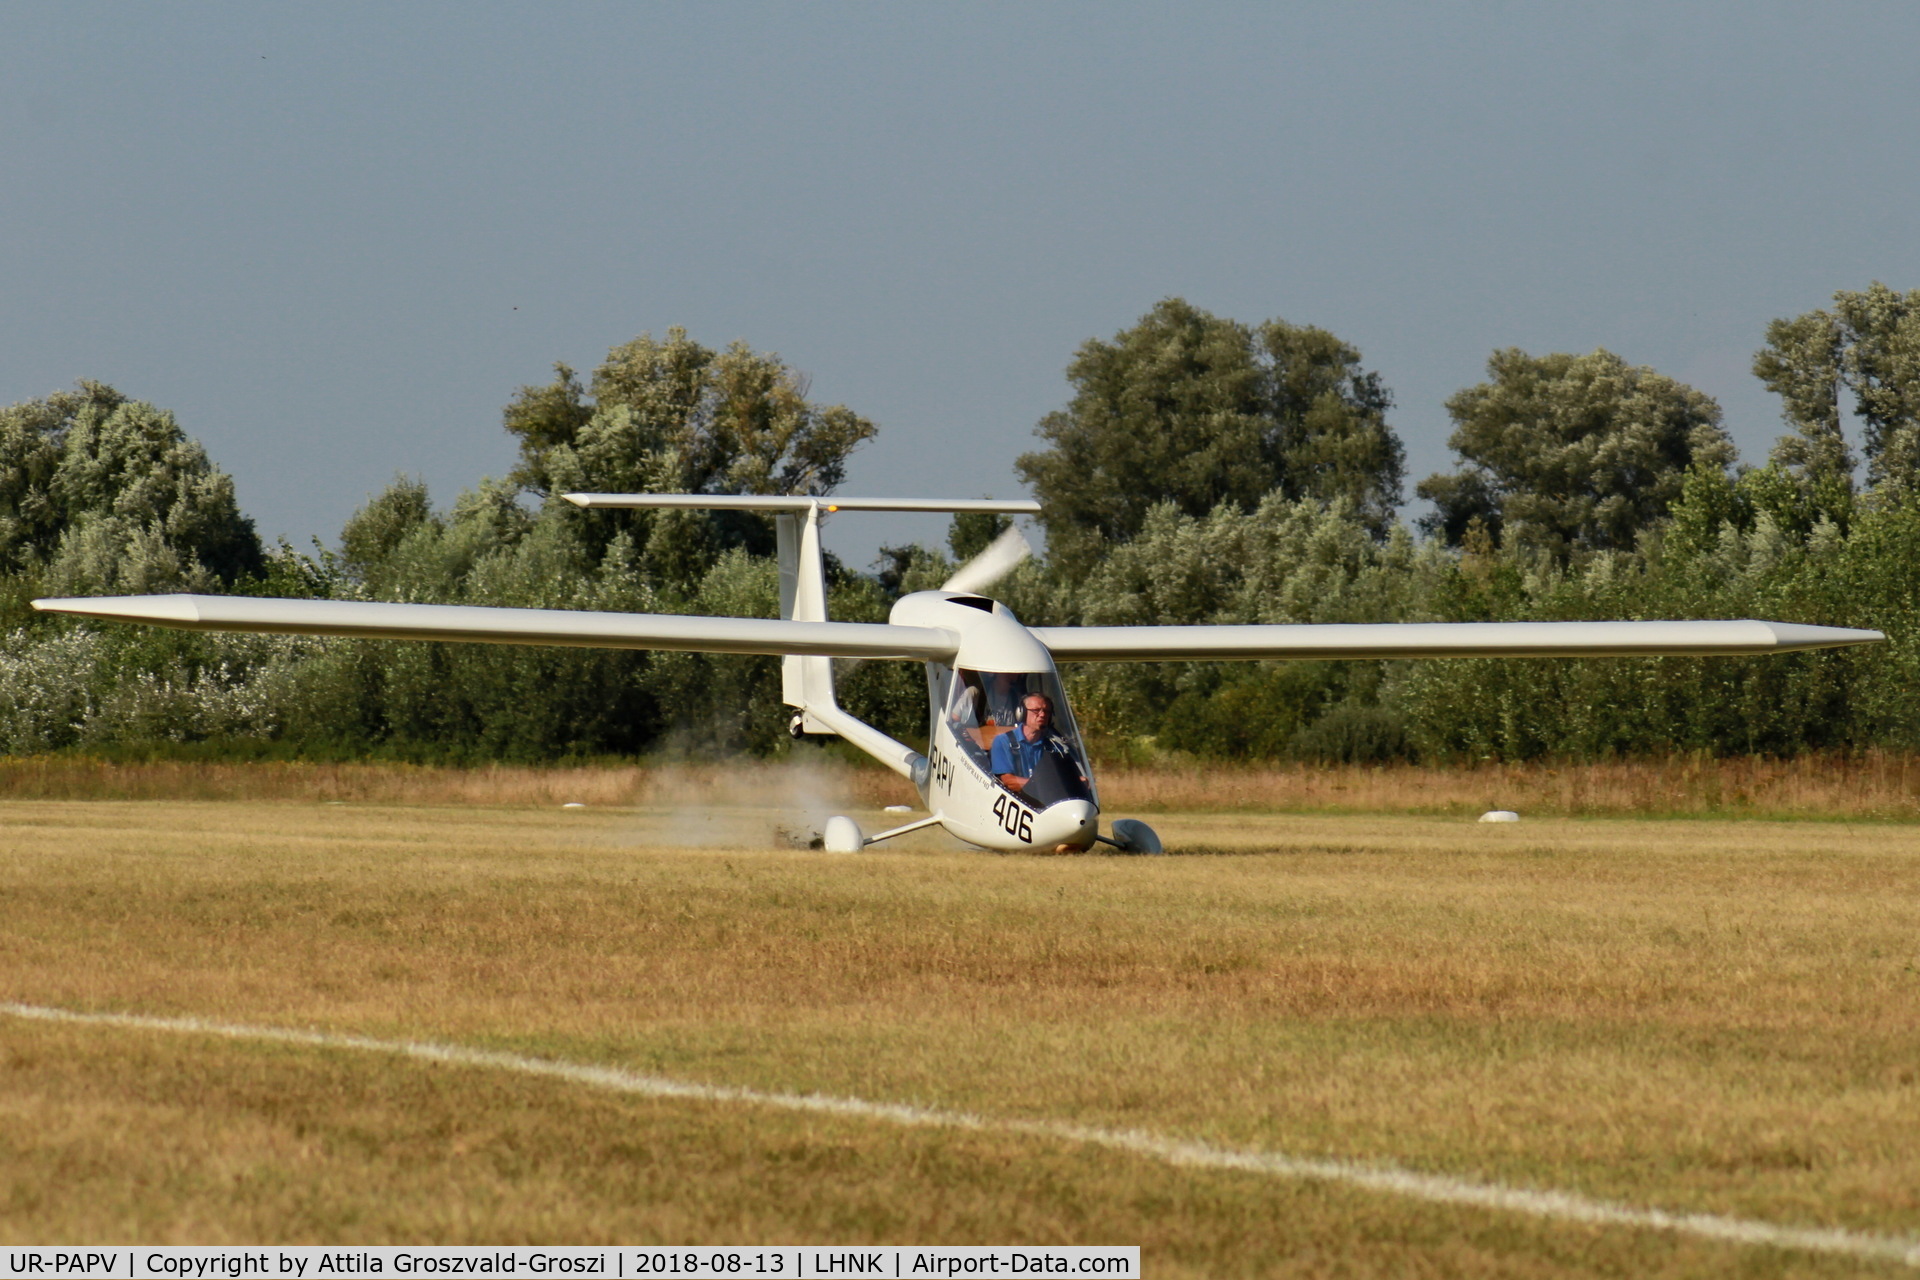 UR-PAPV, 2018 Aeroprakt A-40 C/N 1, Nagykanizsa Airport, Hungary. 16th FAI World Microlight Championship 2018 Nagykanizsa. There is an airplane specially built for this World Championship